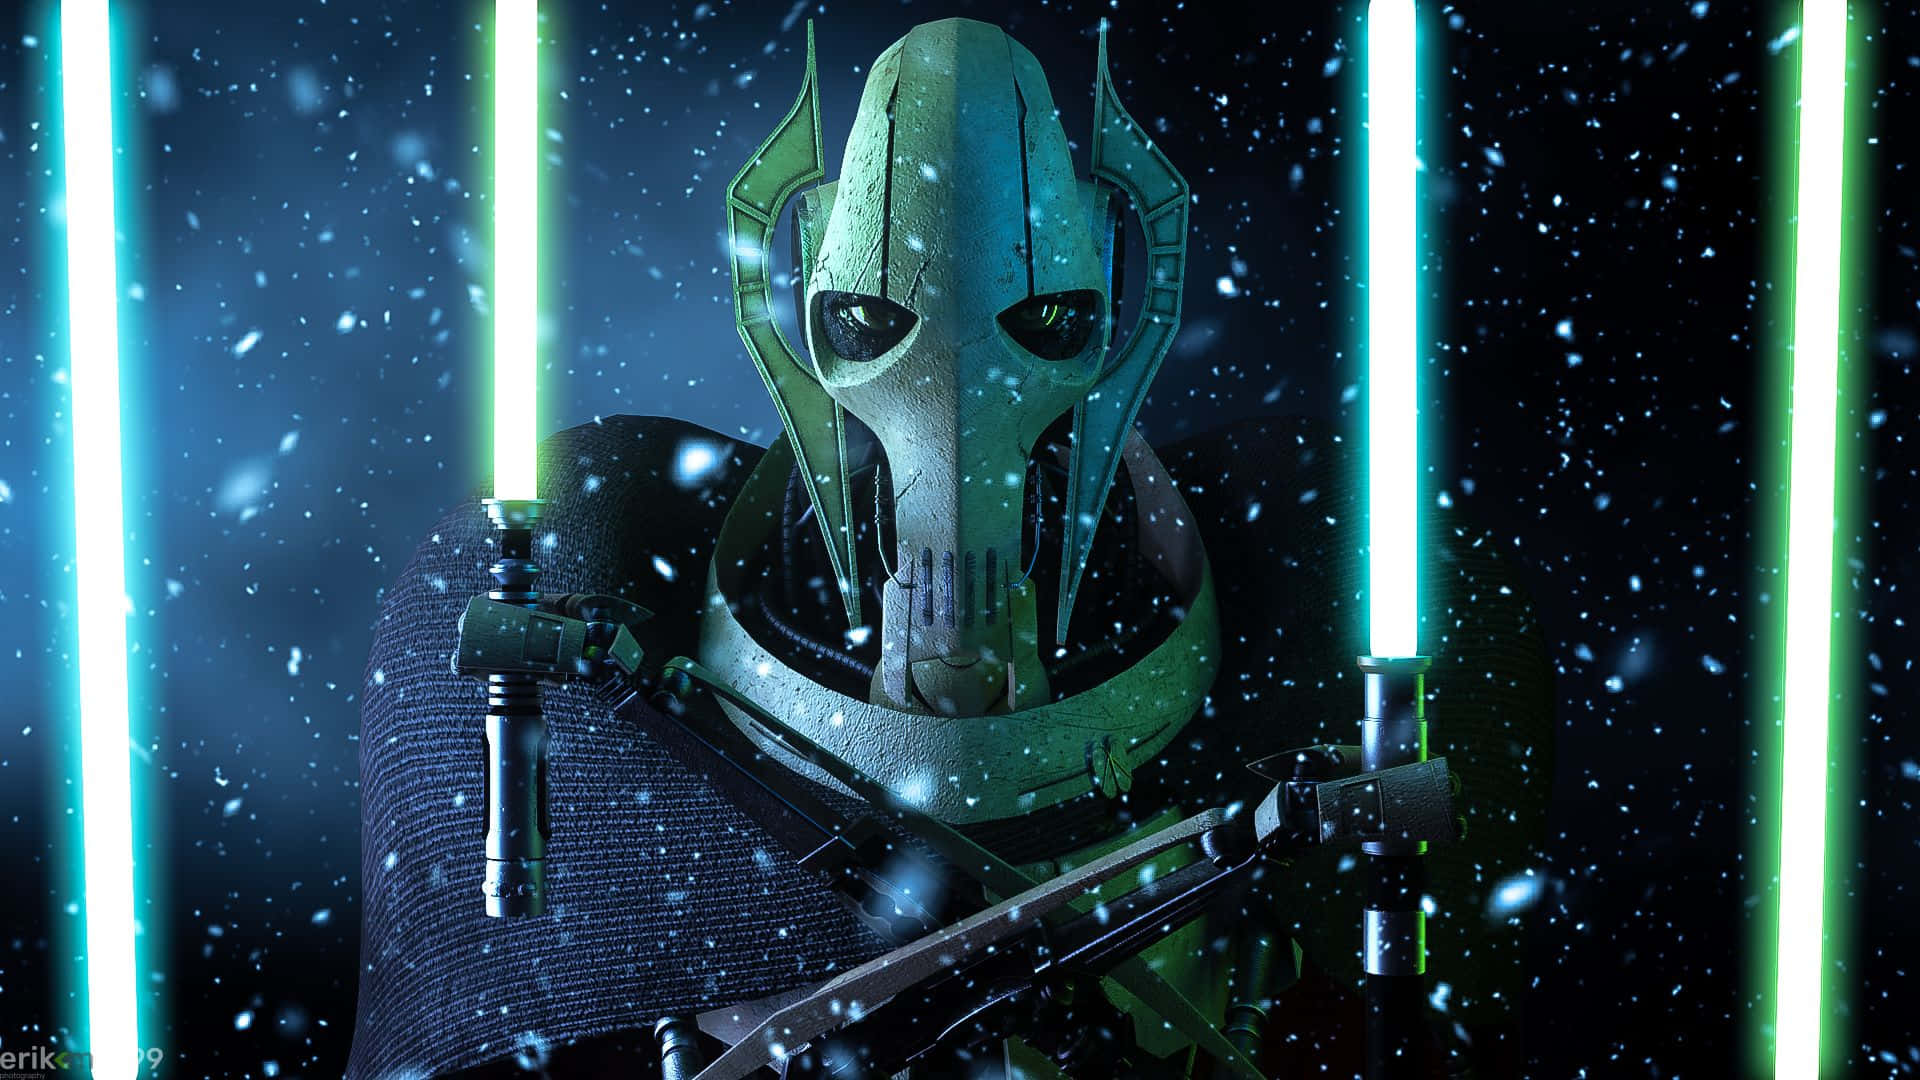 General Grievous, The Ultimate Star Wars Villain Background